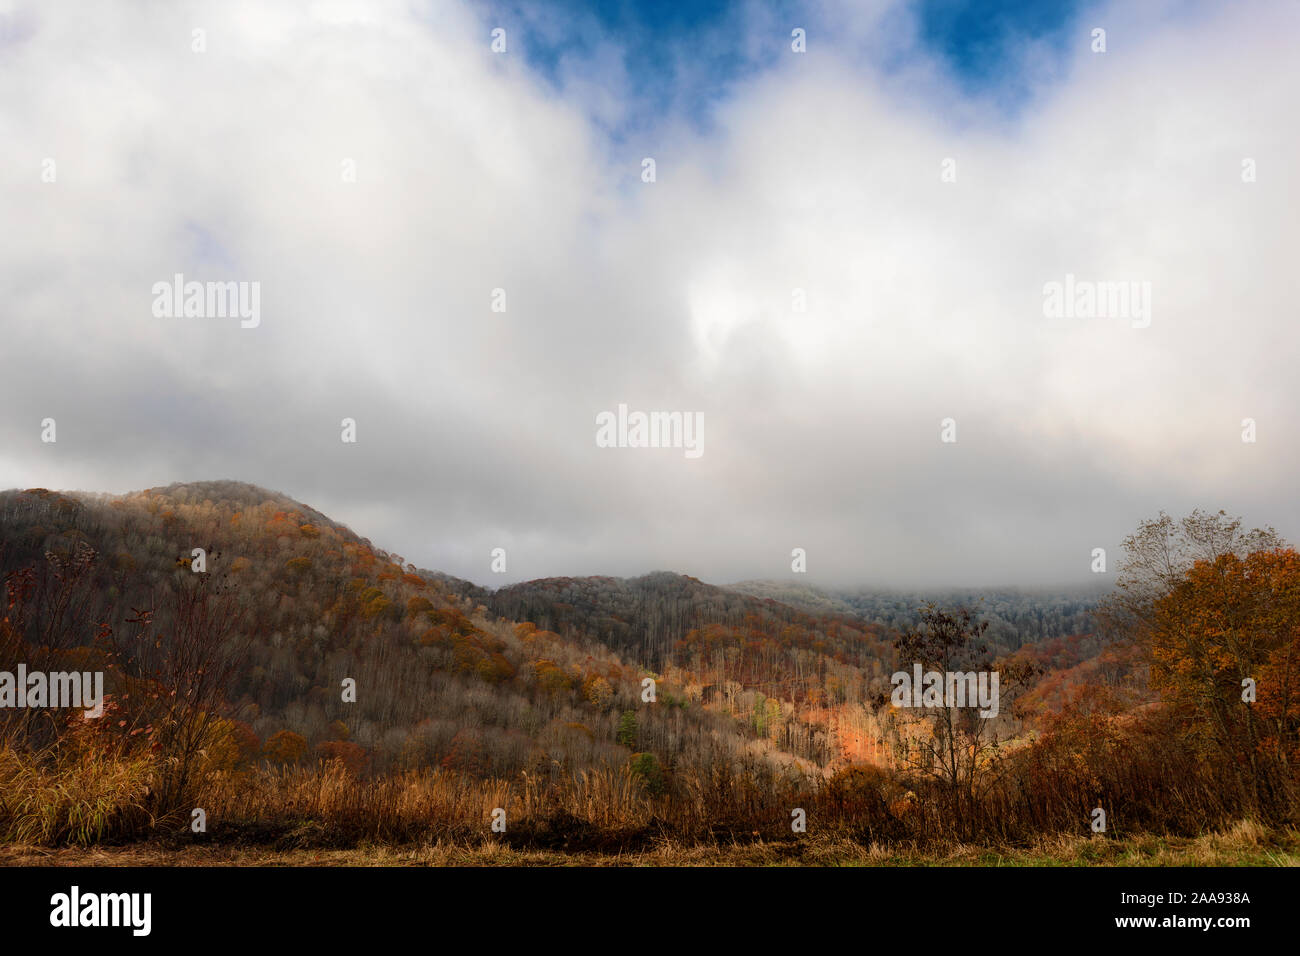 View of stormy weather over section of the Blue Ridge Mountains where a dusting of snow in the higher elevation with warm autumn colors in the lower e Stock Photo